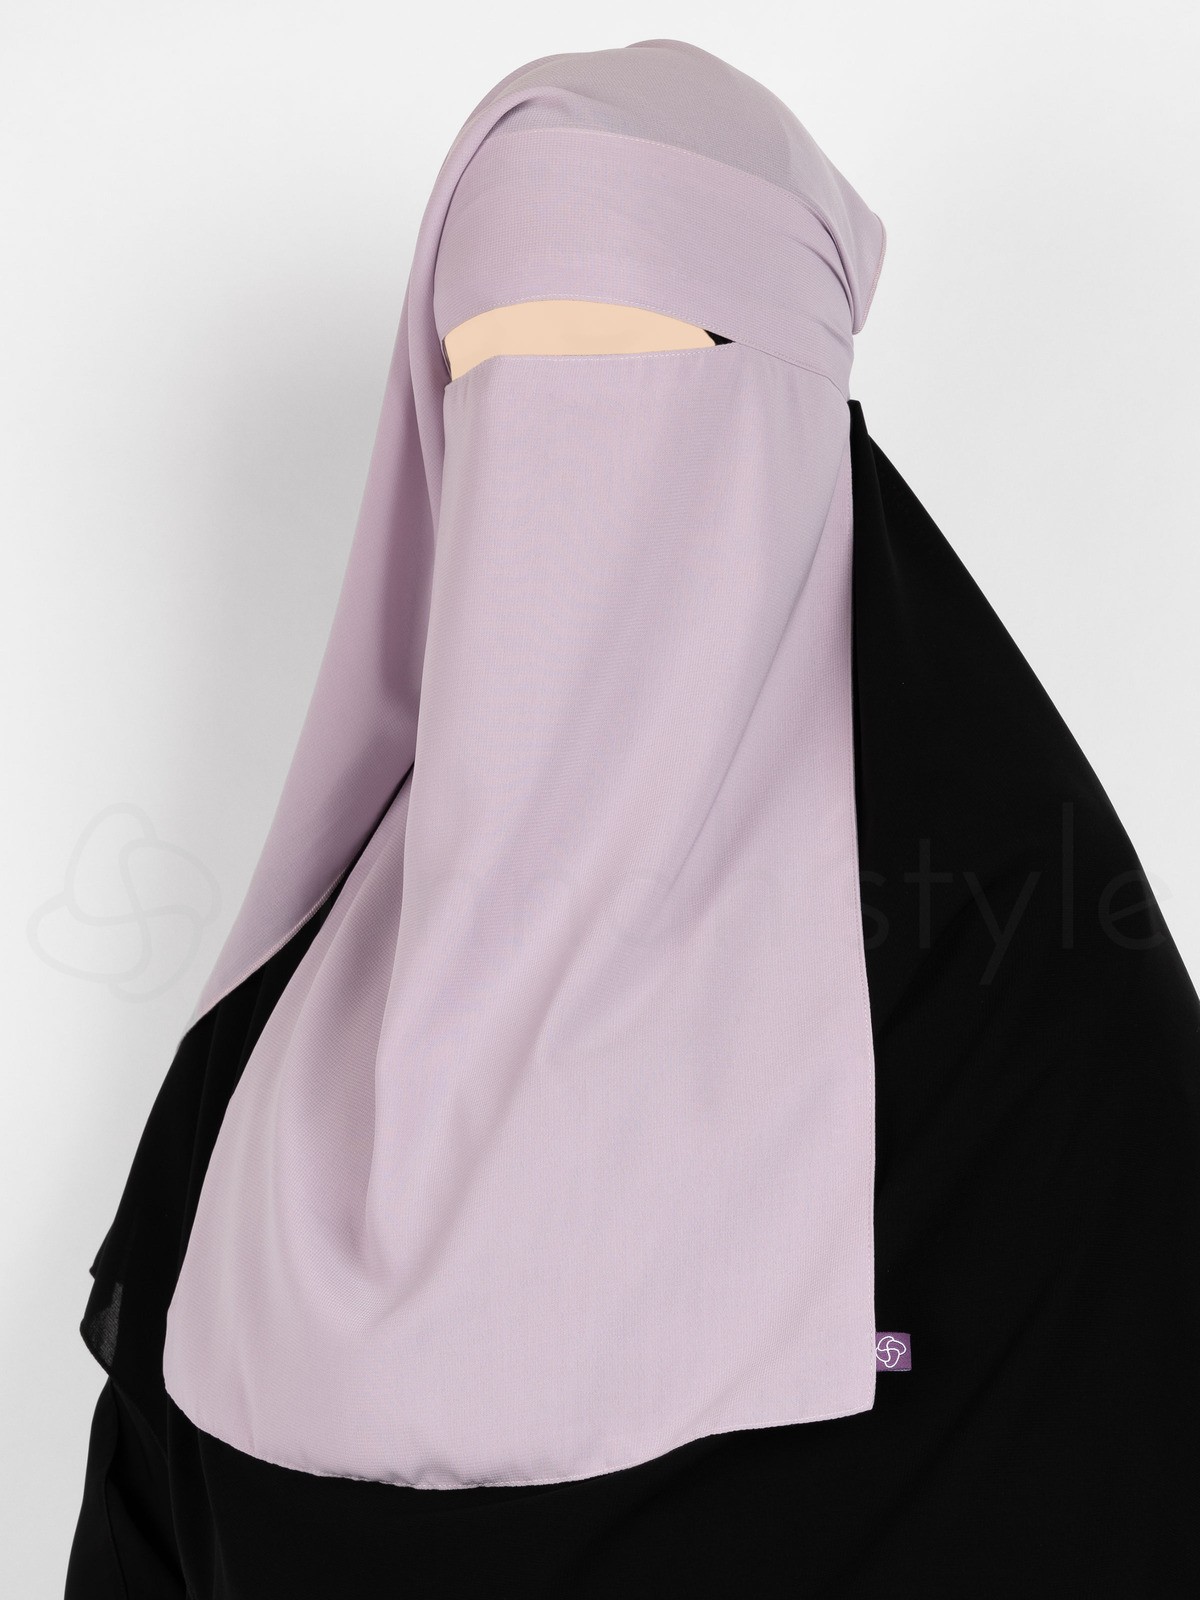 Sunnah Style - Two Layer Niqab (Lavender)